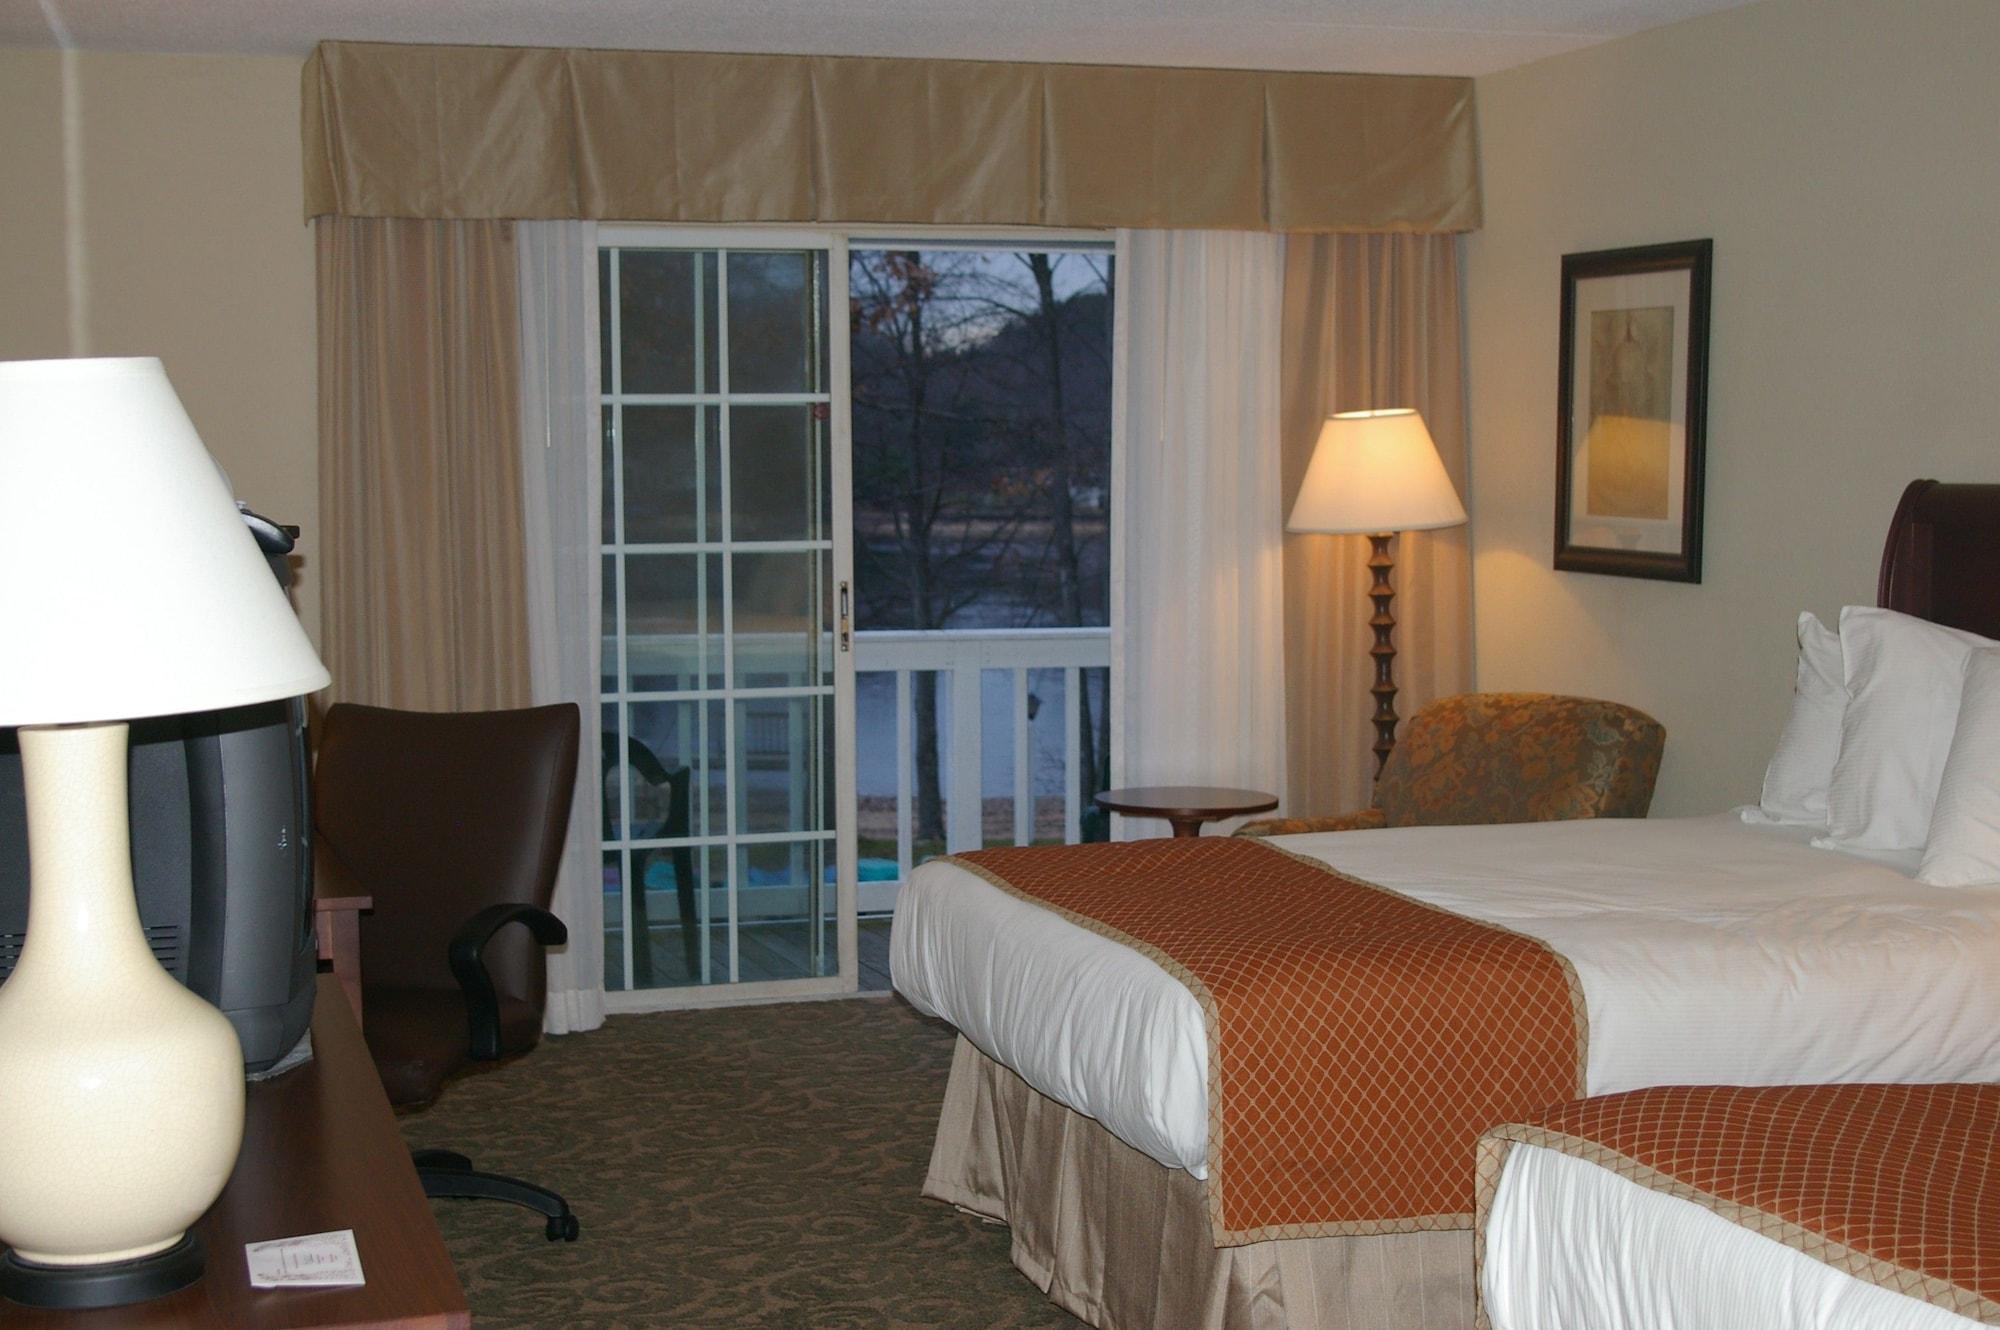 Sturbridge Host Hotel And Conference Center (Adults Only) Rum bild